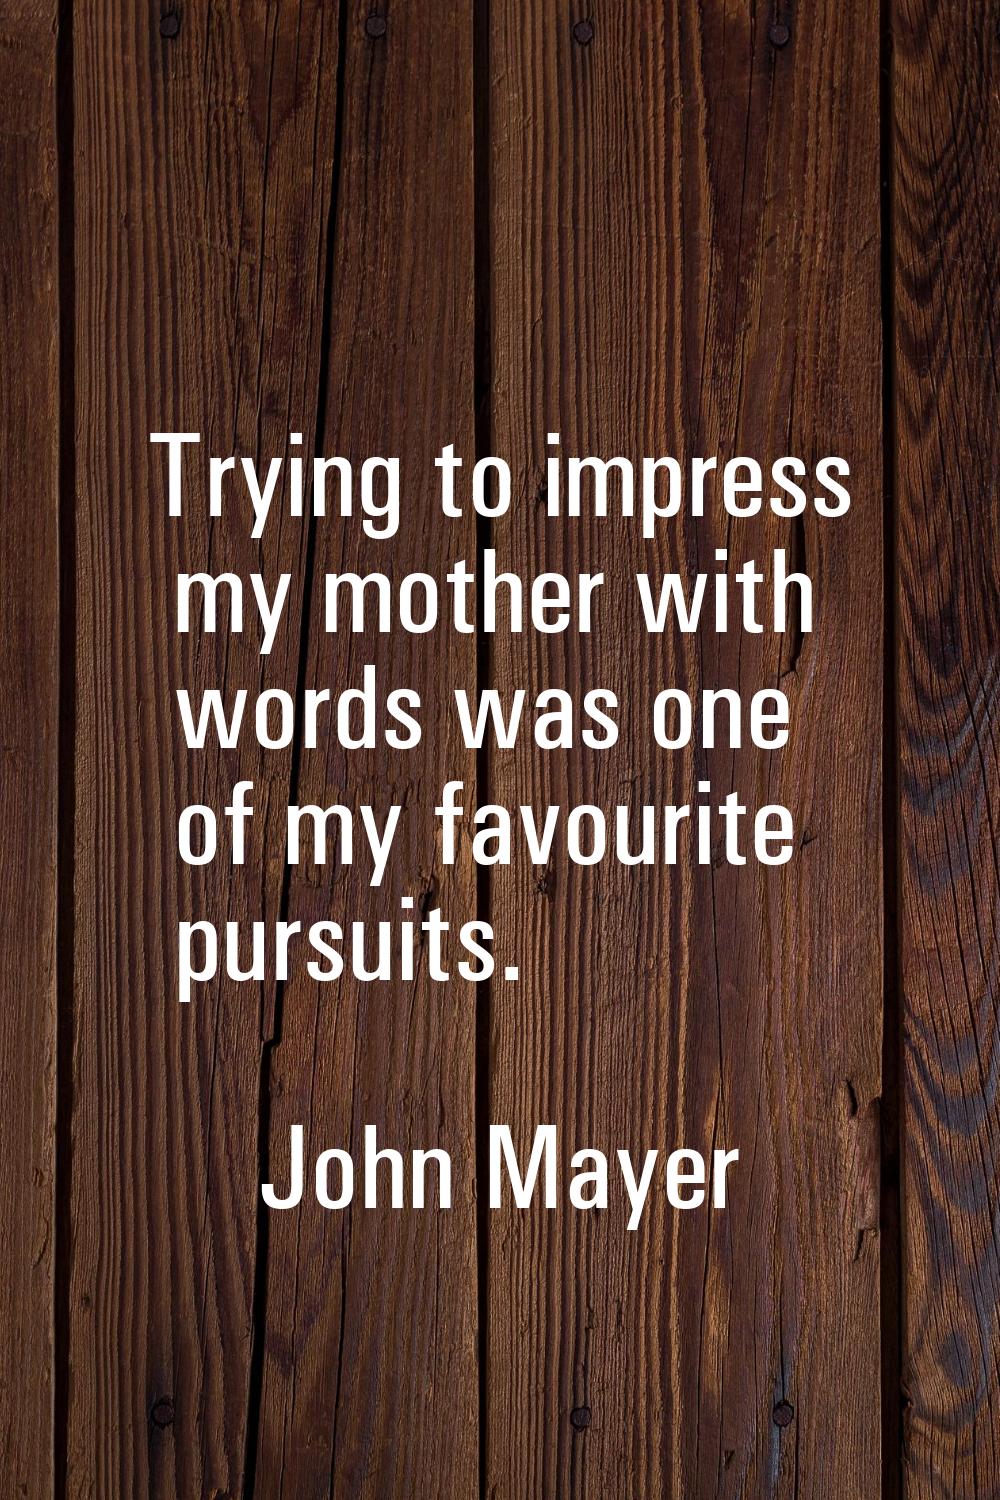 Trying to impress my mother with words was one of my favourite pursuits.